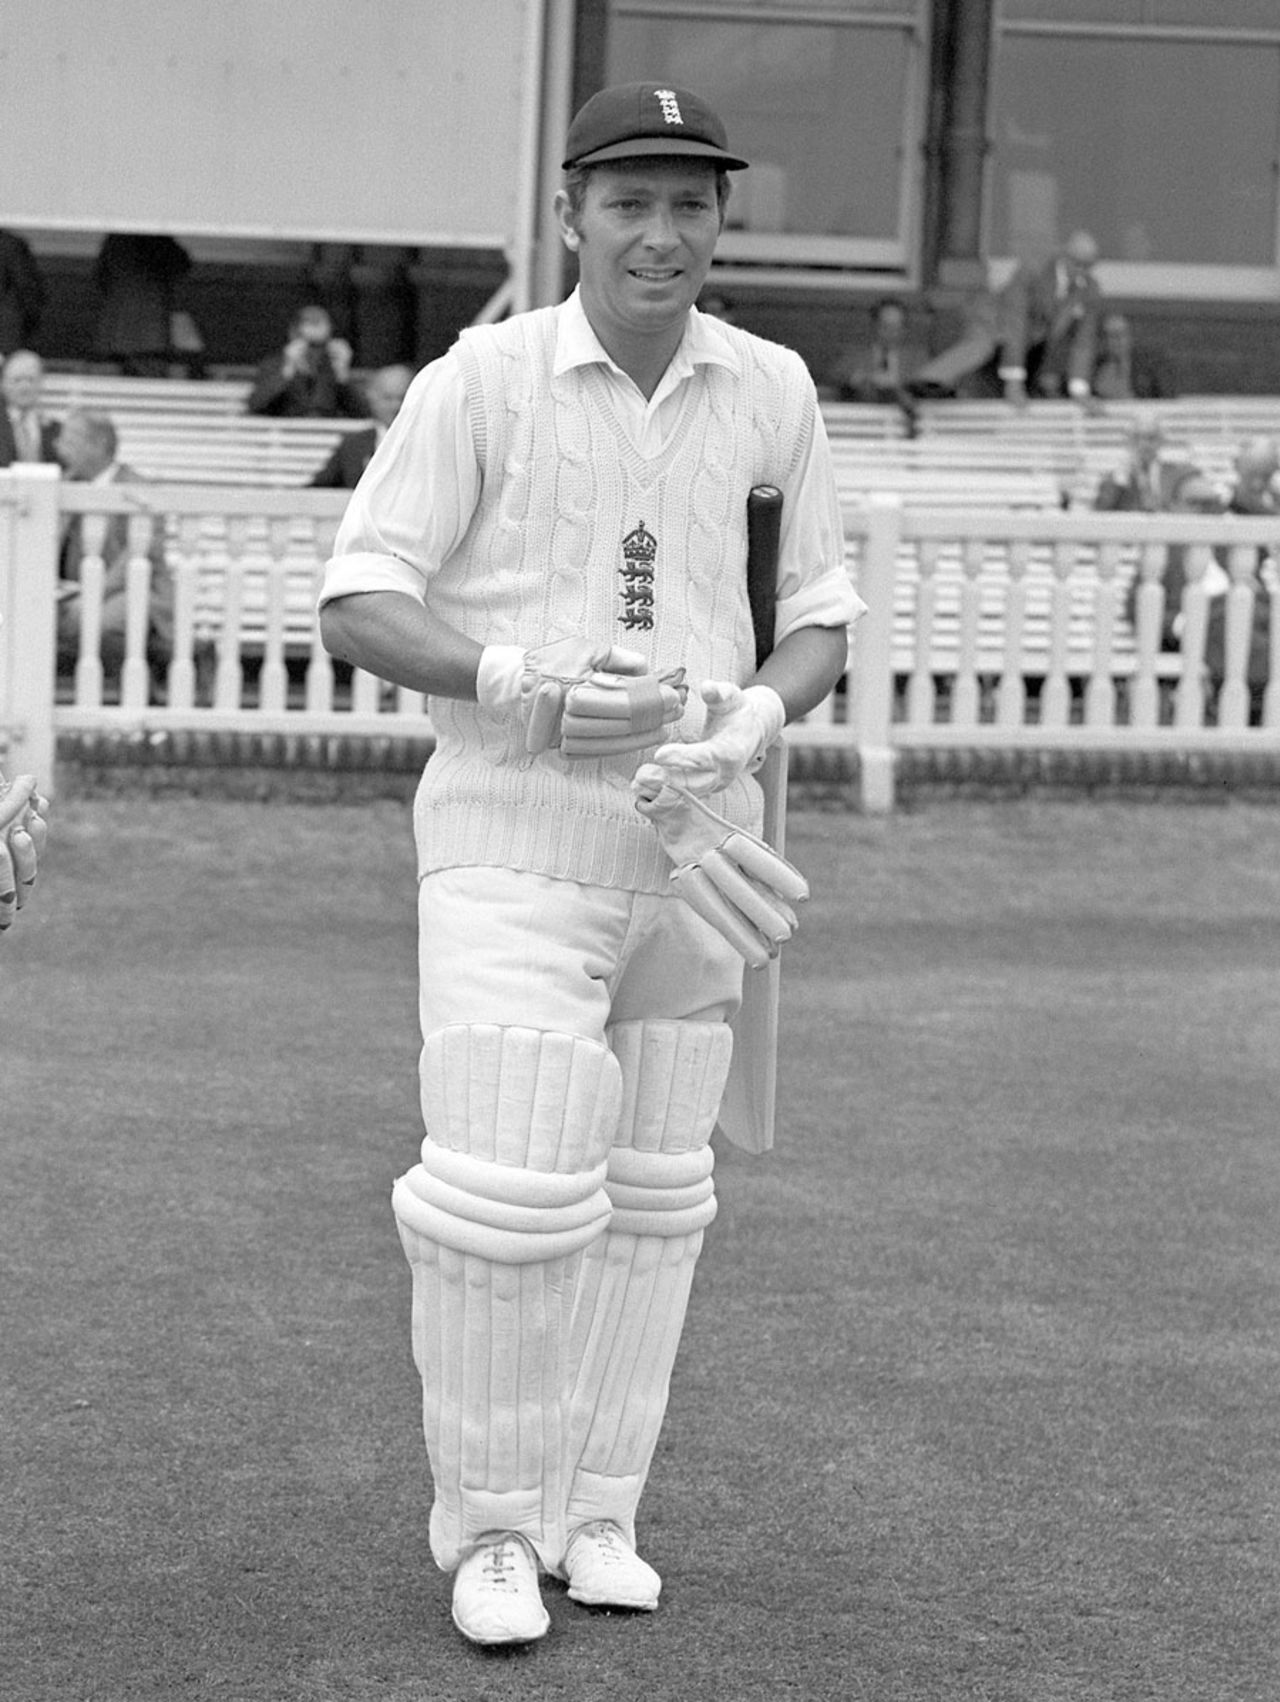 Alan Jones played for England against the Rest of the World XI, England v Rest of the World XI, 1st day, Lord's, June 17, 1970